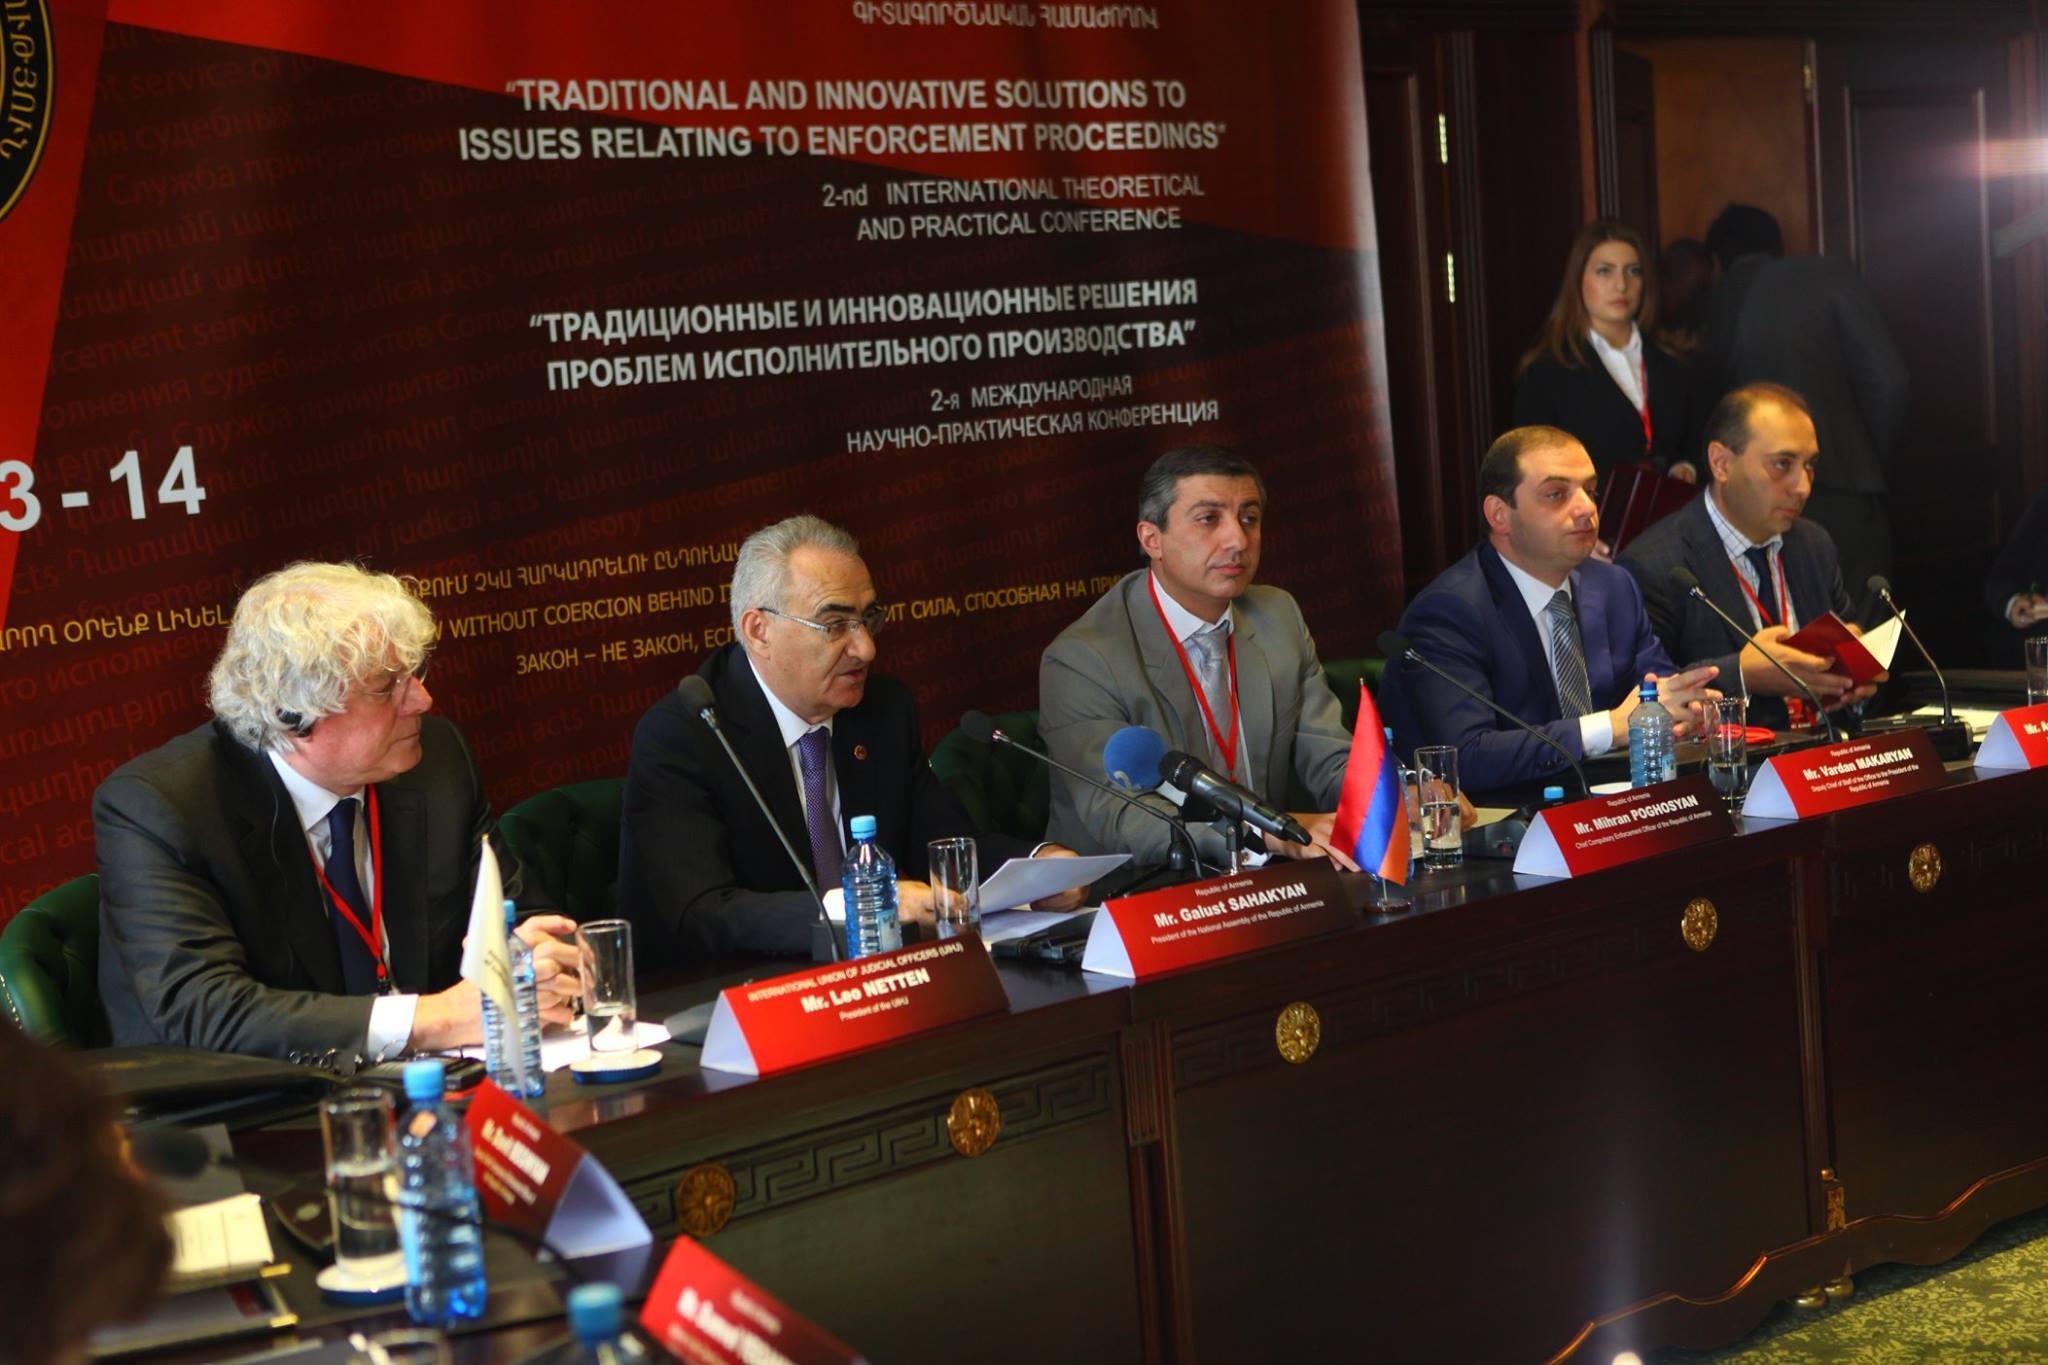 Enforcement officers of 18 countries discuss enforcement proceedings in Armenia